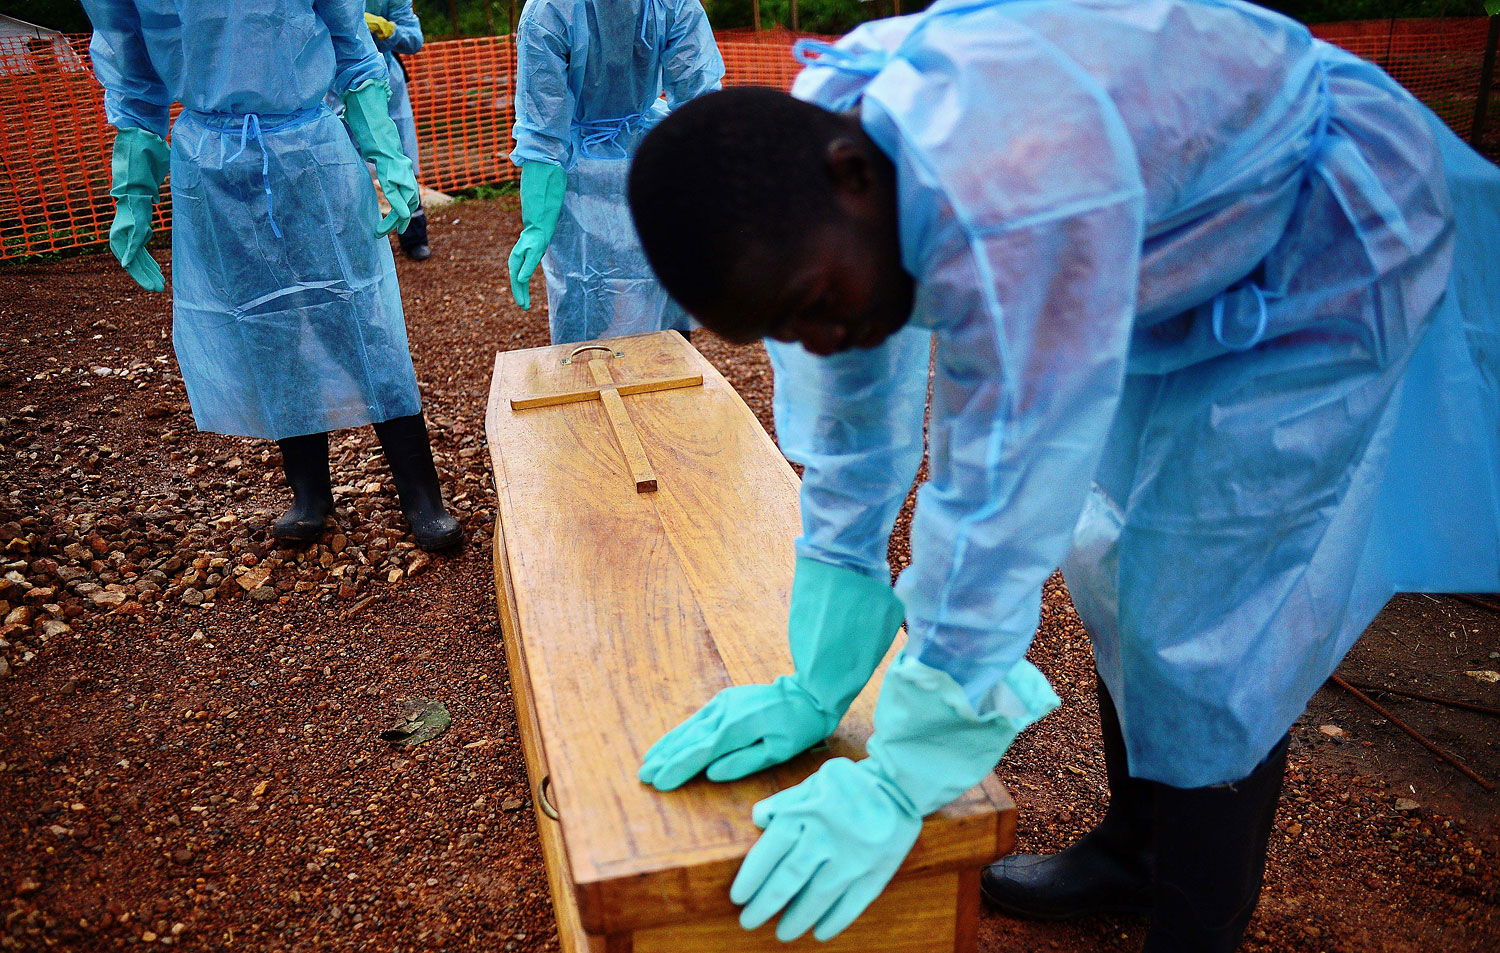 A Sierra Leone government burial team with the coffin of Dr Modupeh Cole, Sierra Leone's second senior physician to die of Ebola, at the MSF facility in Kailahun, Sierra Leone, on Aug. 14, 2014. (Carl De Souza—AFP/Getty Images)